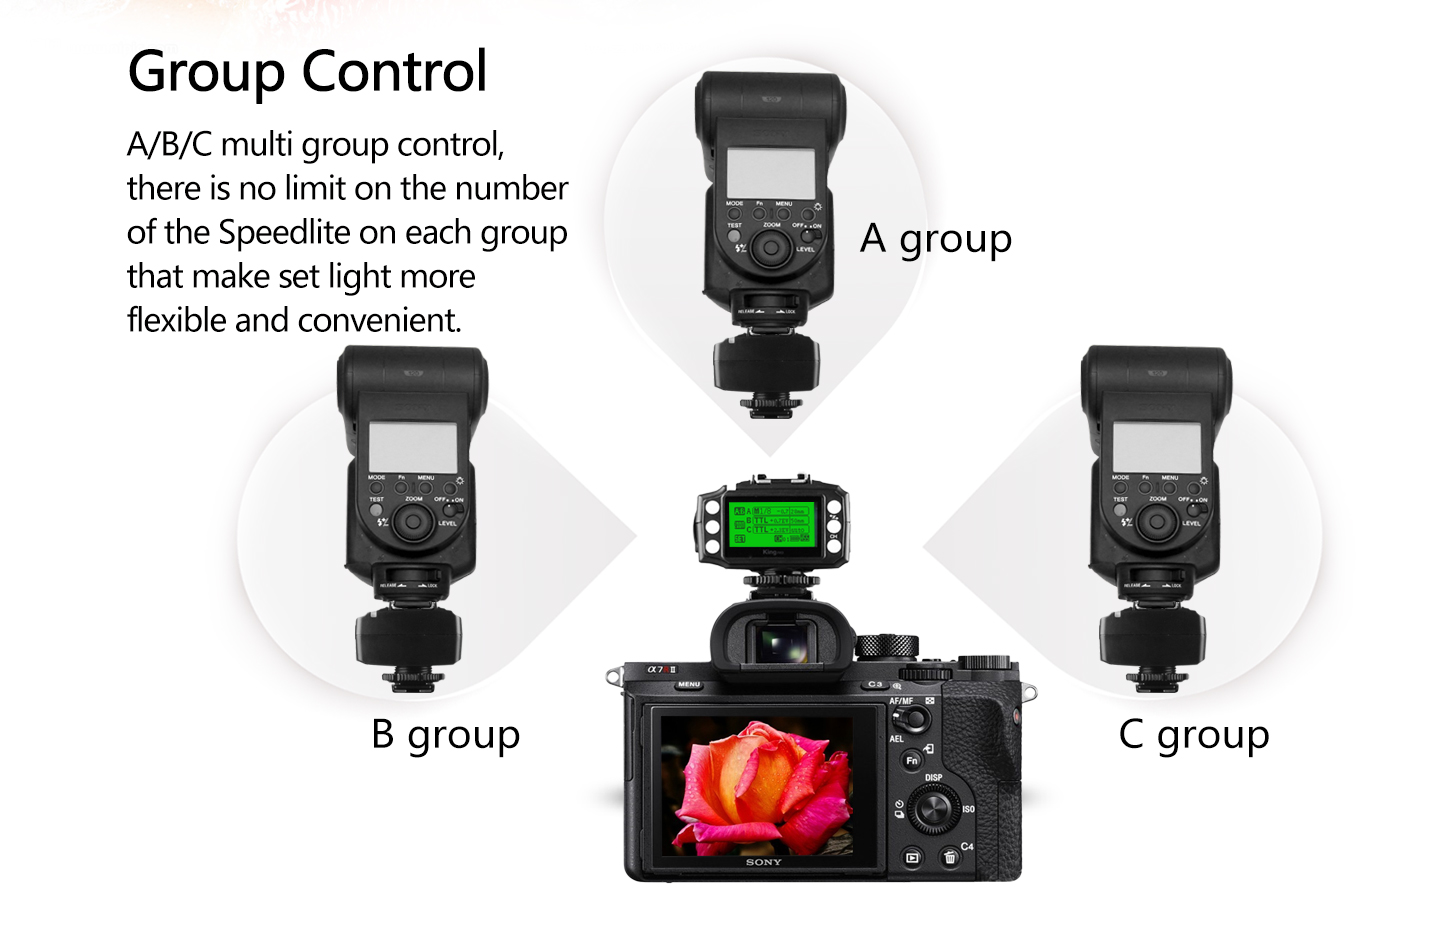 Group Control